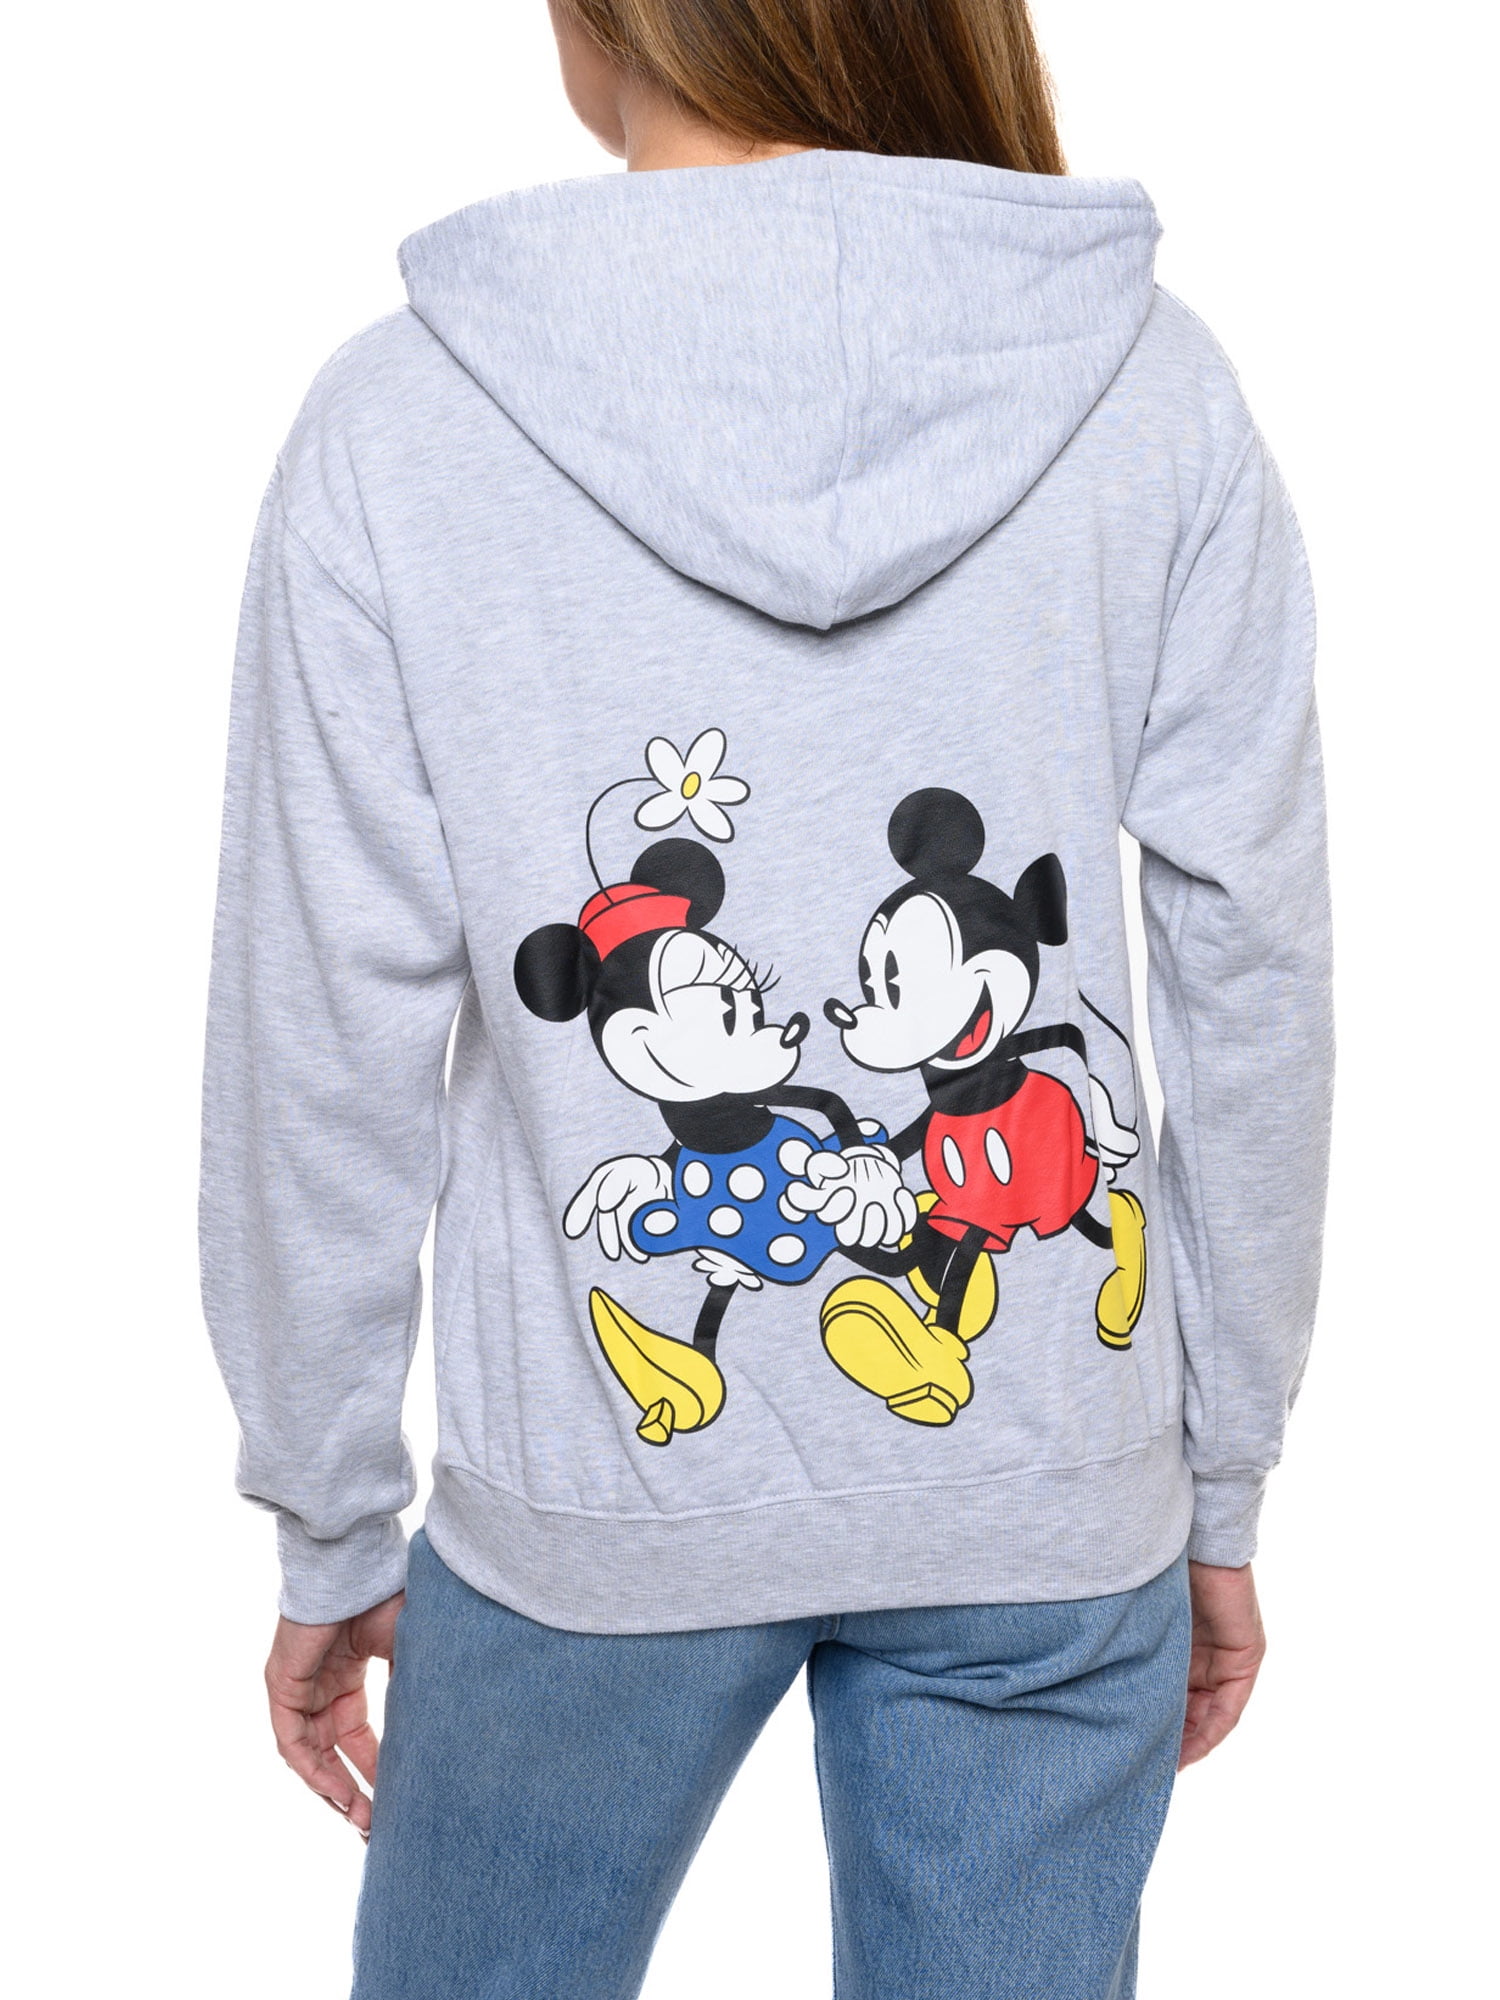 Women's and Women's Plus Mickey & Minnie Mouse Zip Hoodie